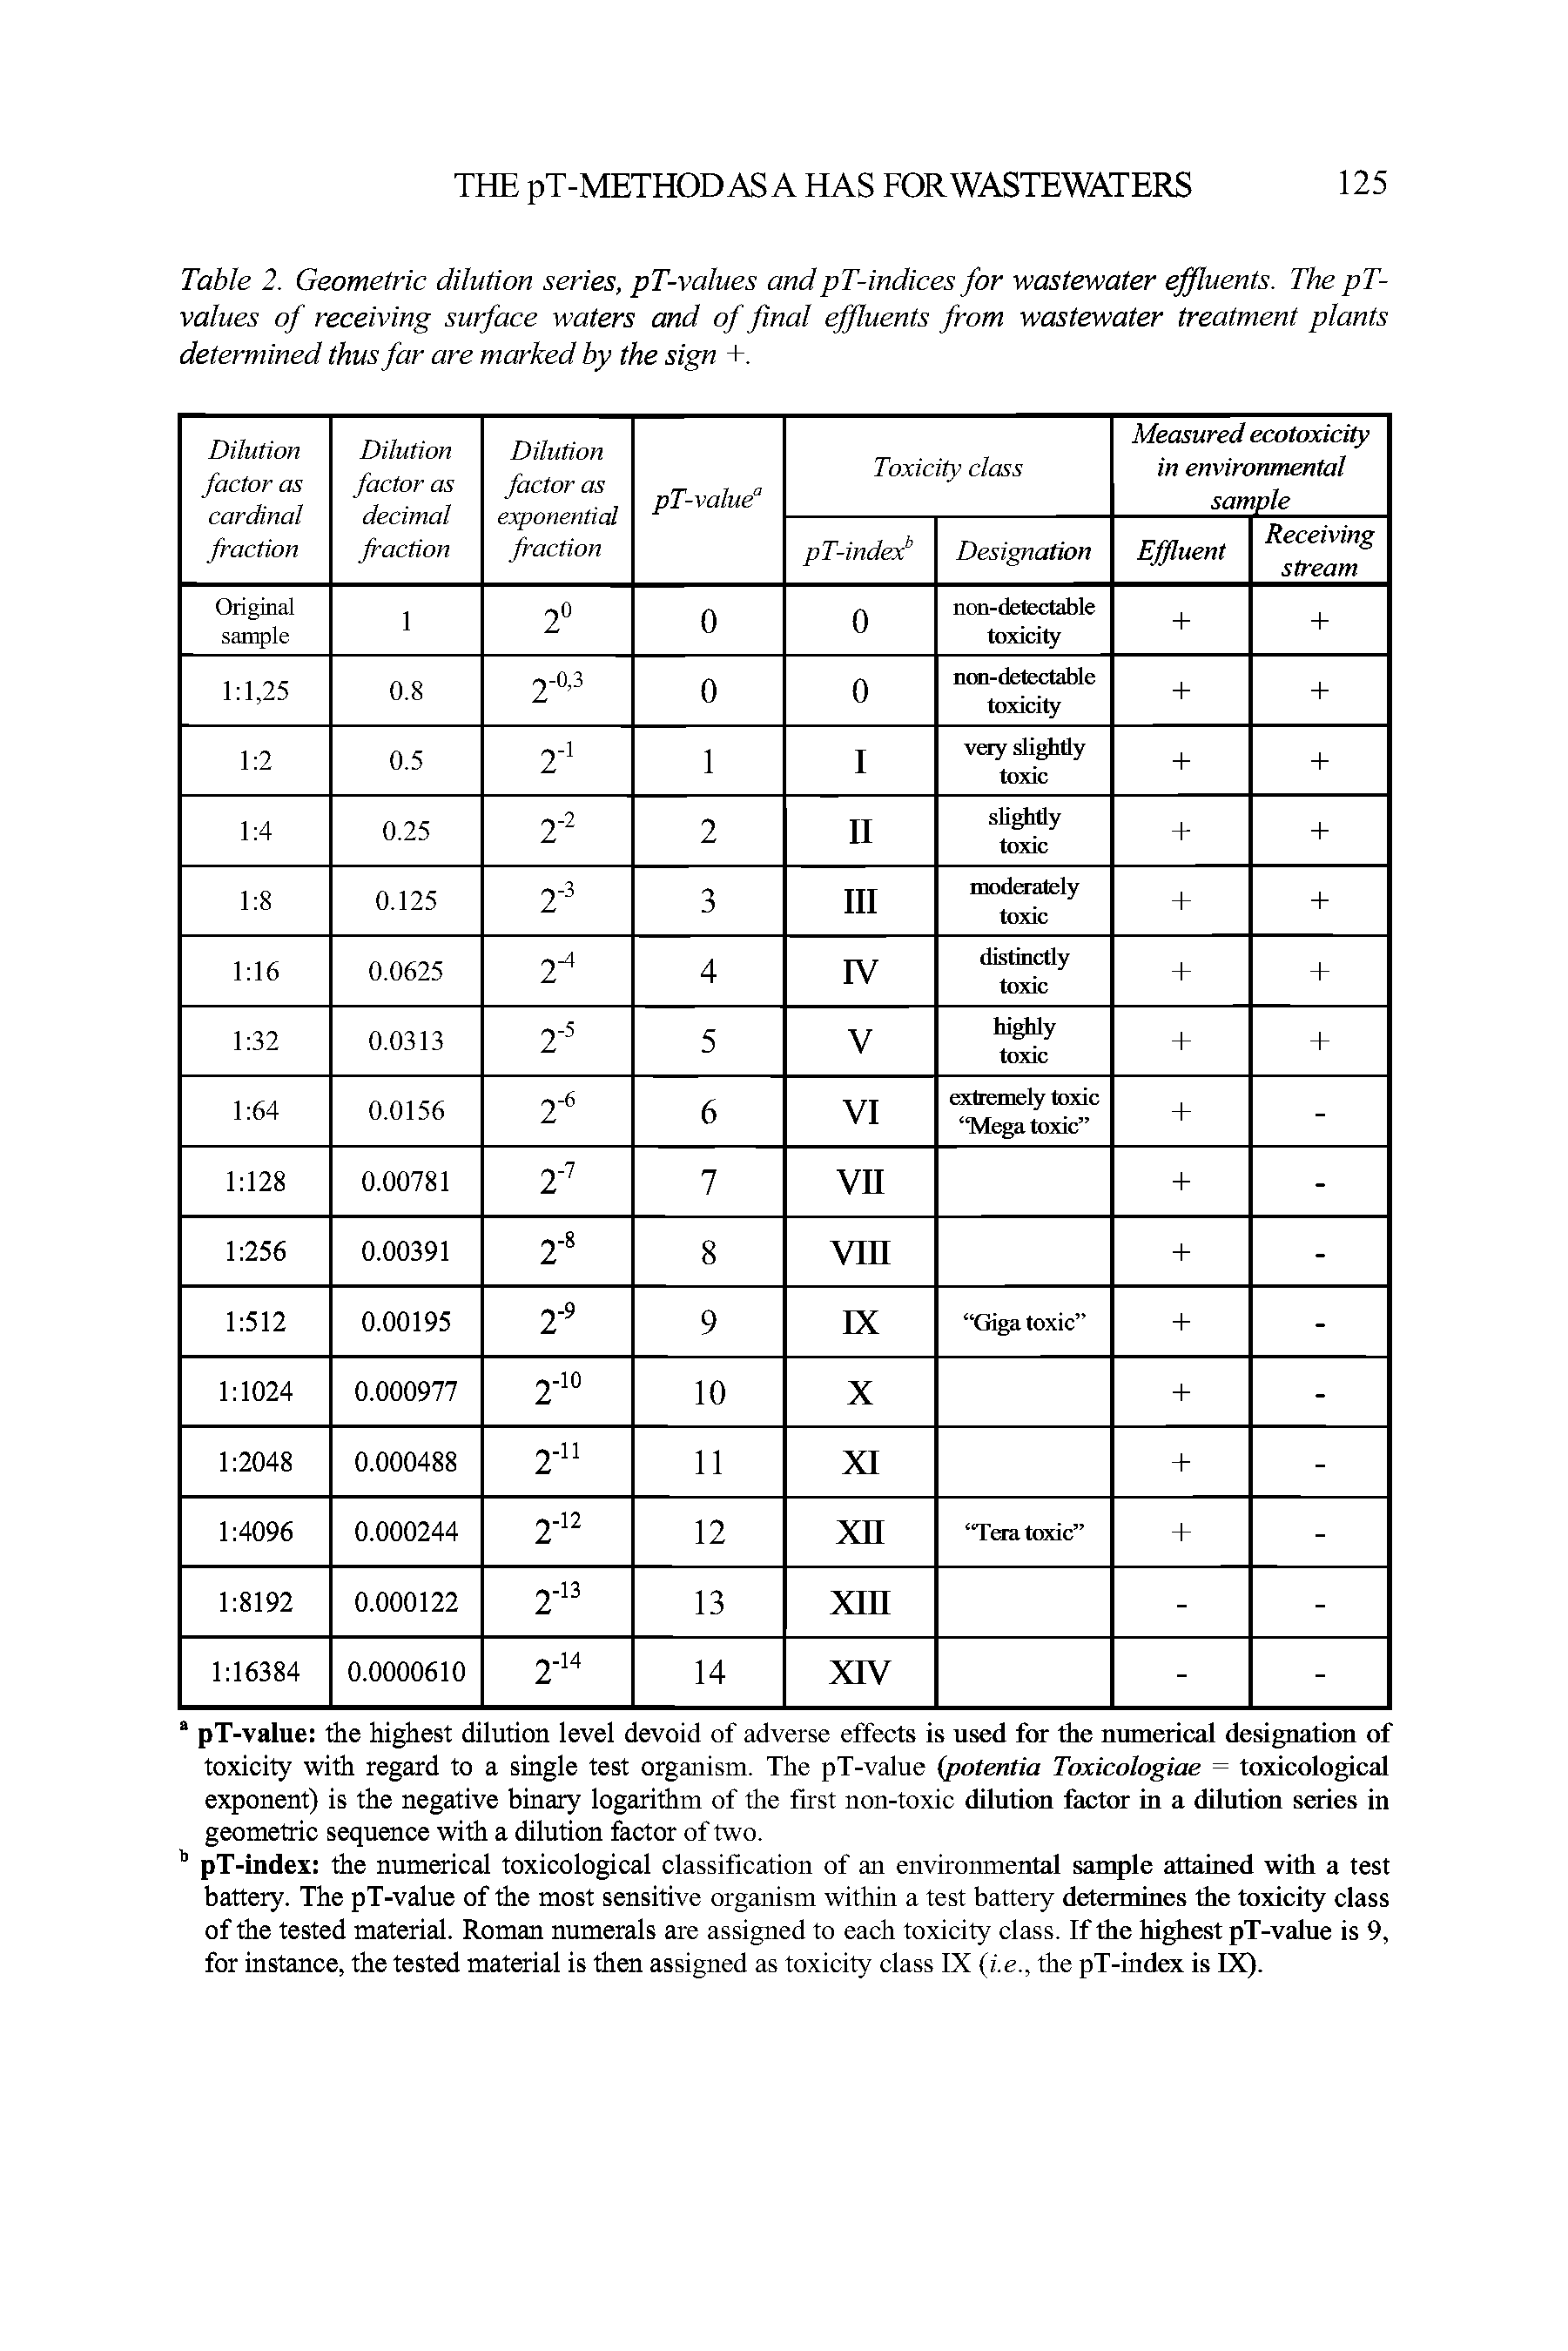 Table 2. Geometric dilution series, pT-values andpT-indices for wastewater effluents. The pT-values of receiving surface waters and of final effluents from wastewater treatment plants determined thus far are marked by the sign +.